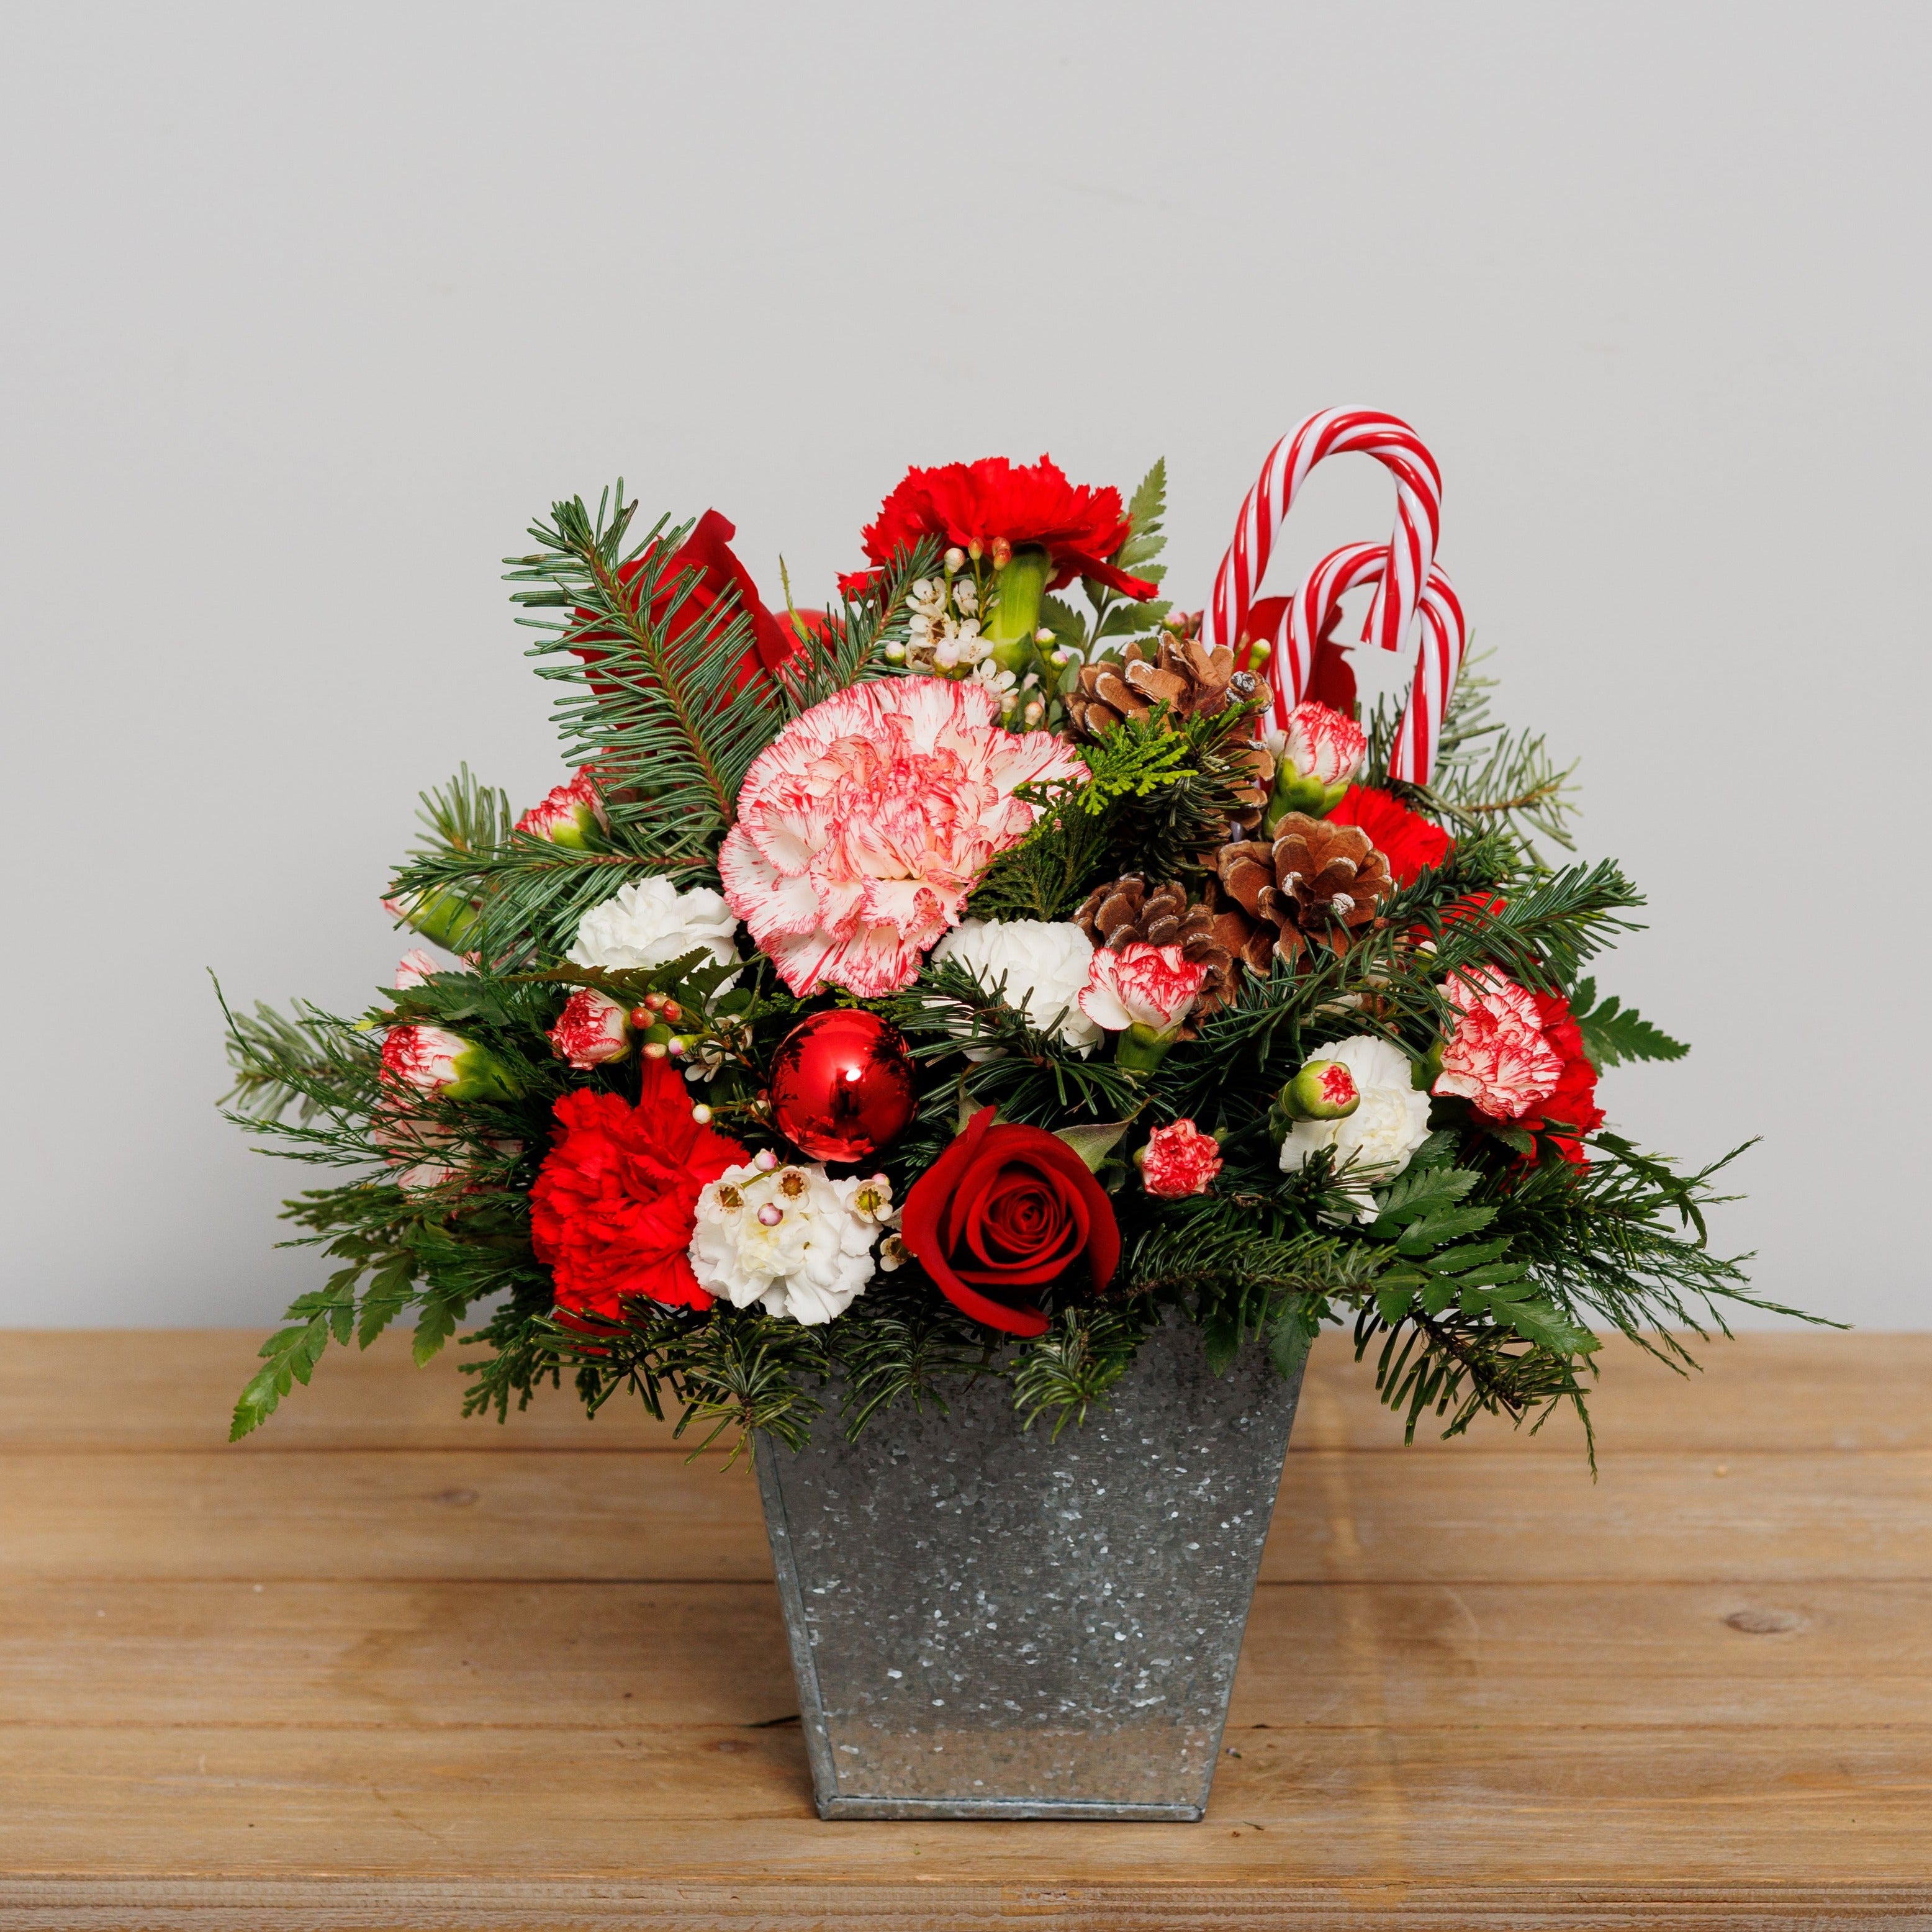 A red and white holiday arrangement in a tin container with candy canes.